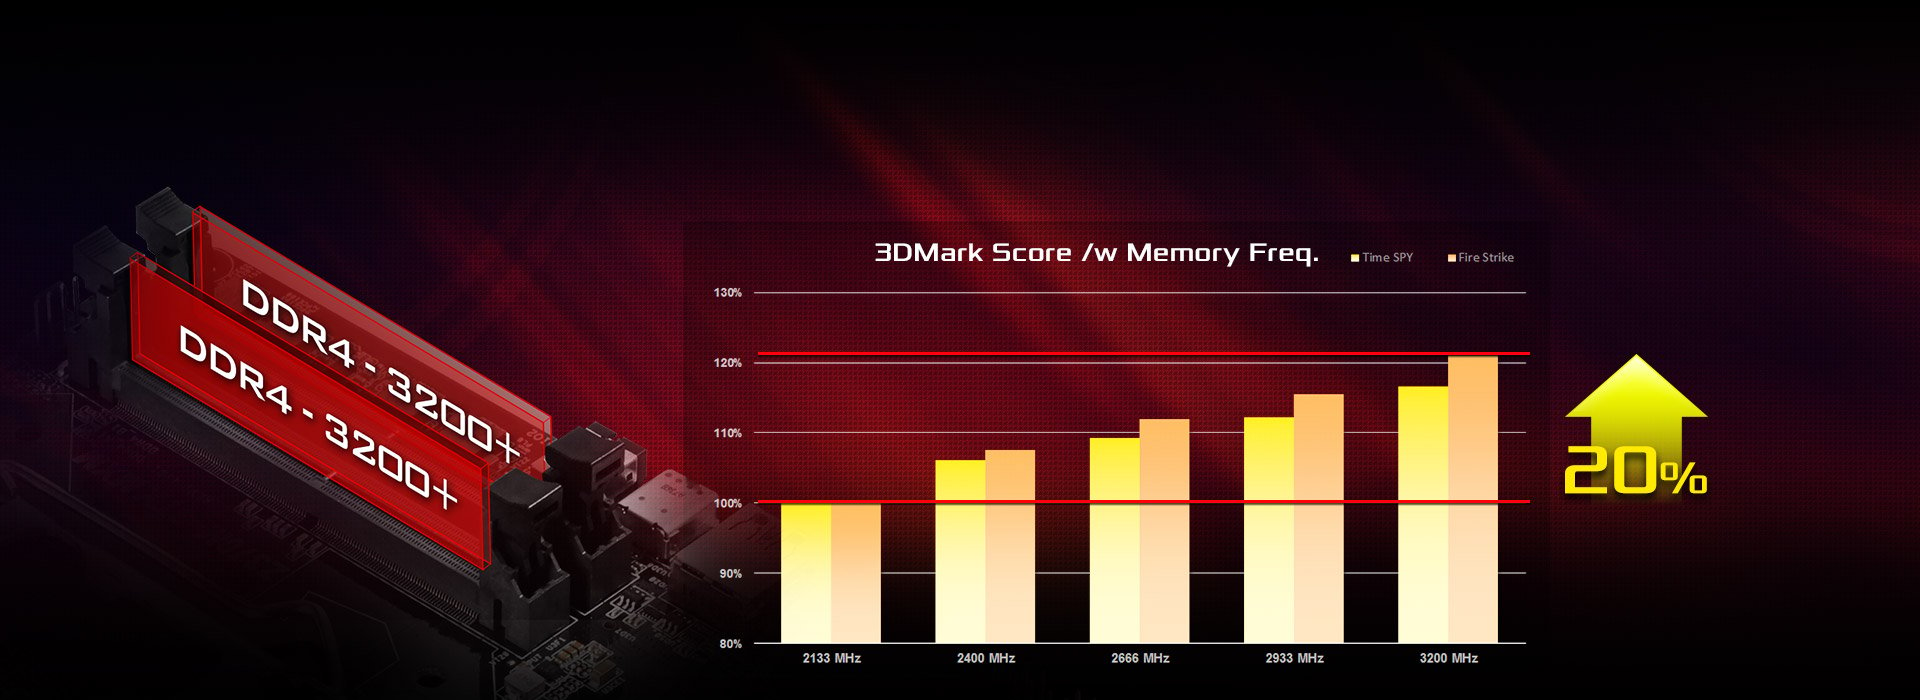 Graph showing the 3DMark Score of memory frequencies from 2133MHz to 3200MHz, a 20% increase from top to bottom.